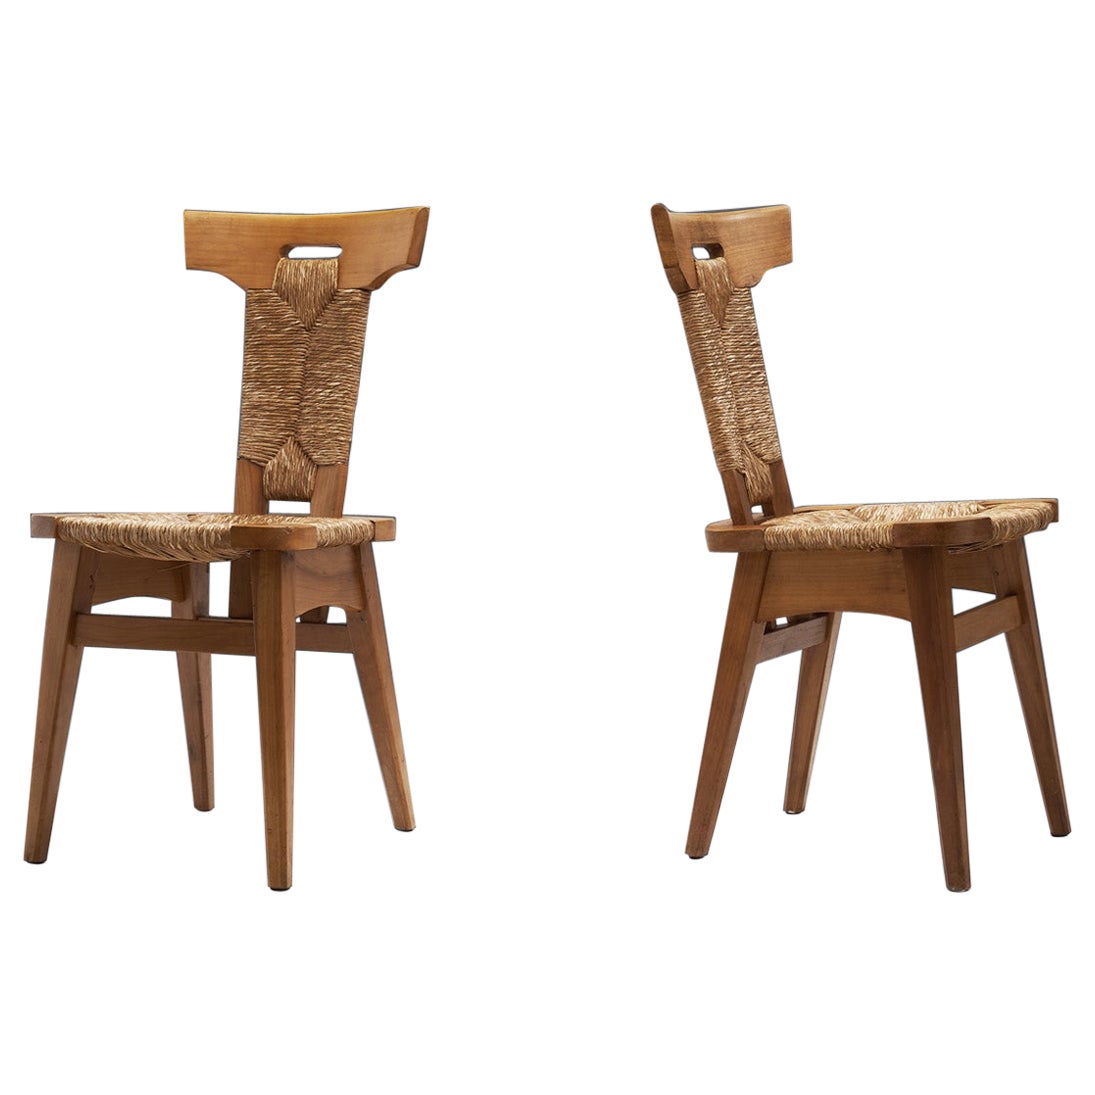 Dutch Arts & Crafts Chairs by W. Kuyper, The Netherlands 1920s For Sale